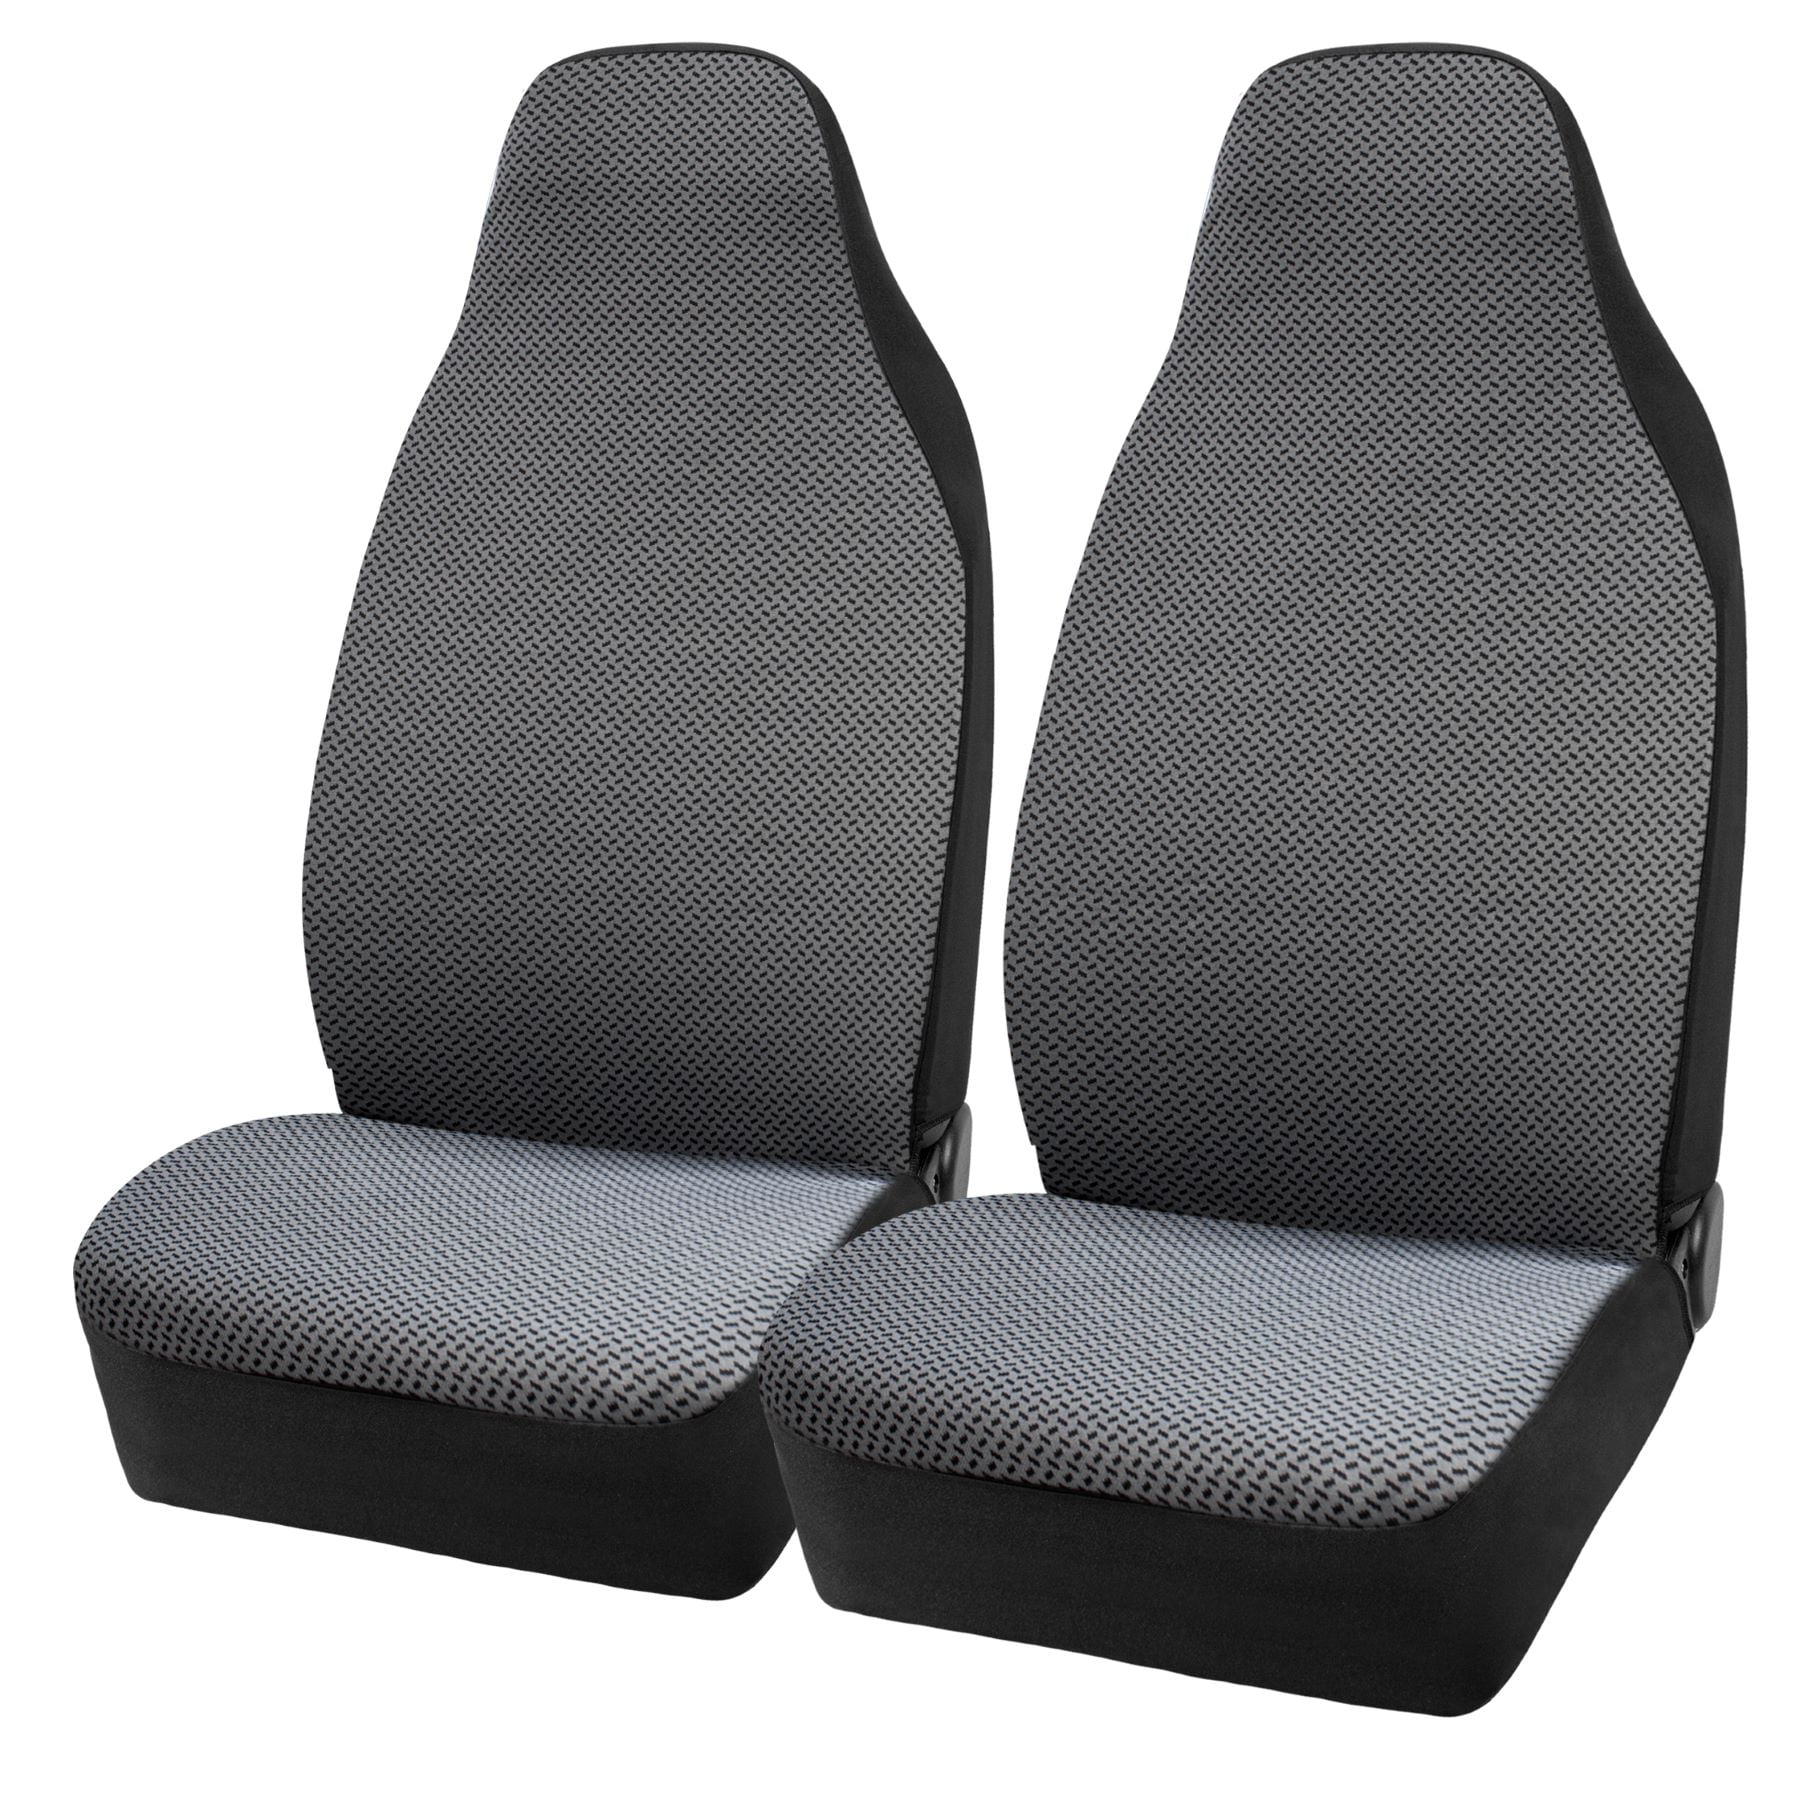 Auto Drive Piece High Back Seat Covers Starla Jacquard Polyester Black,  Universal Fit, AD081702B